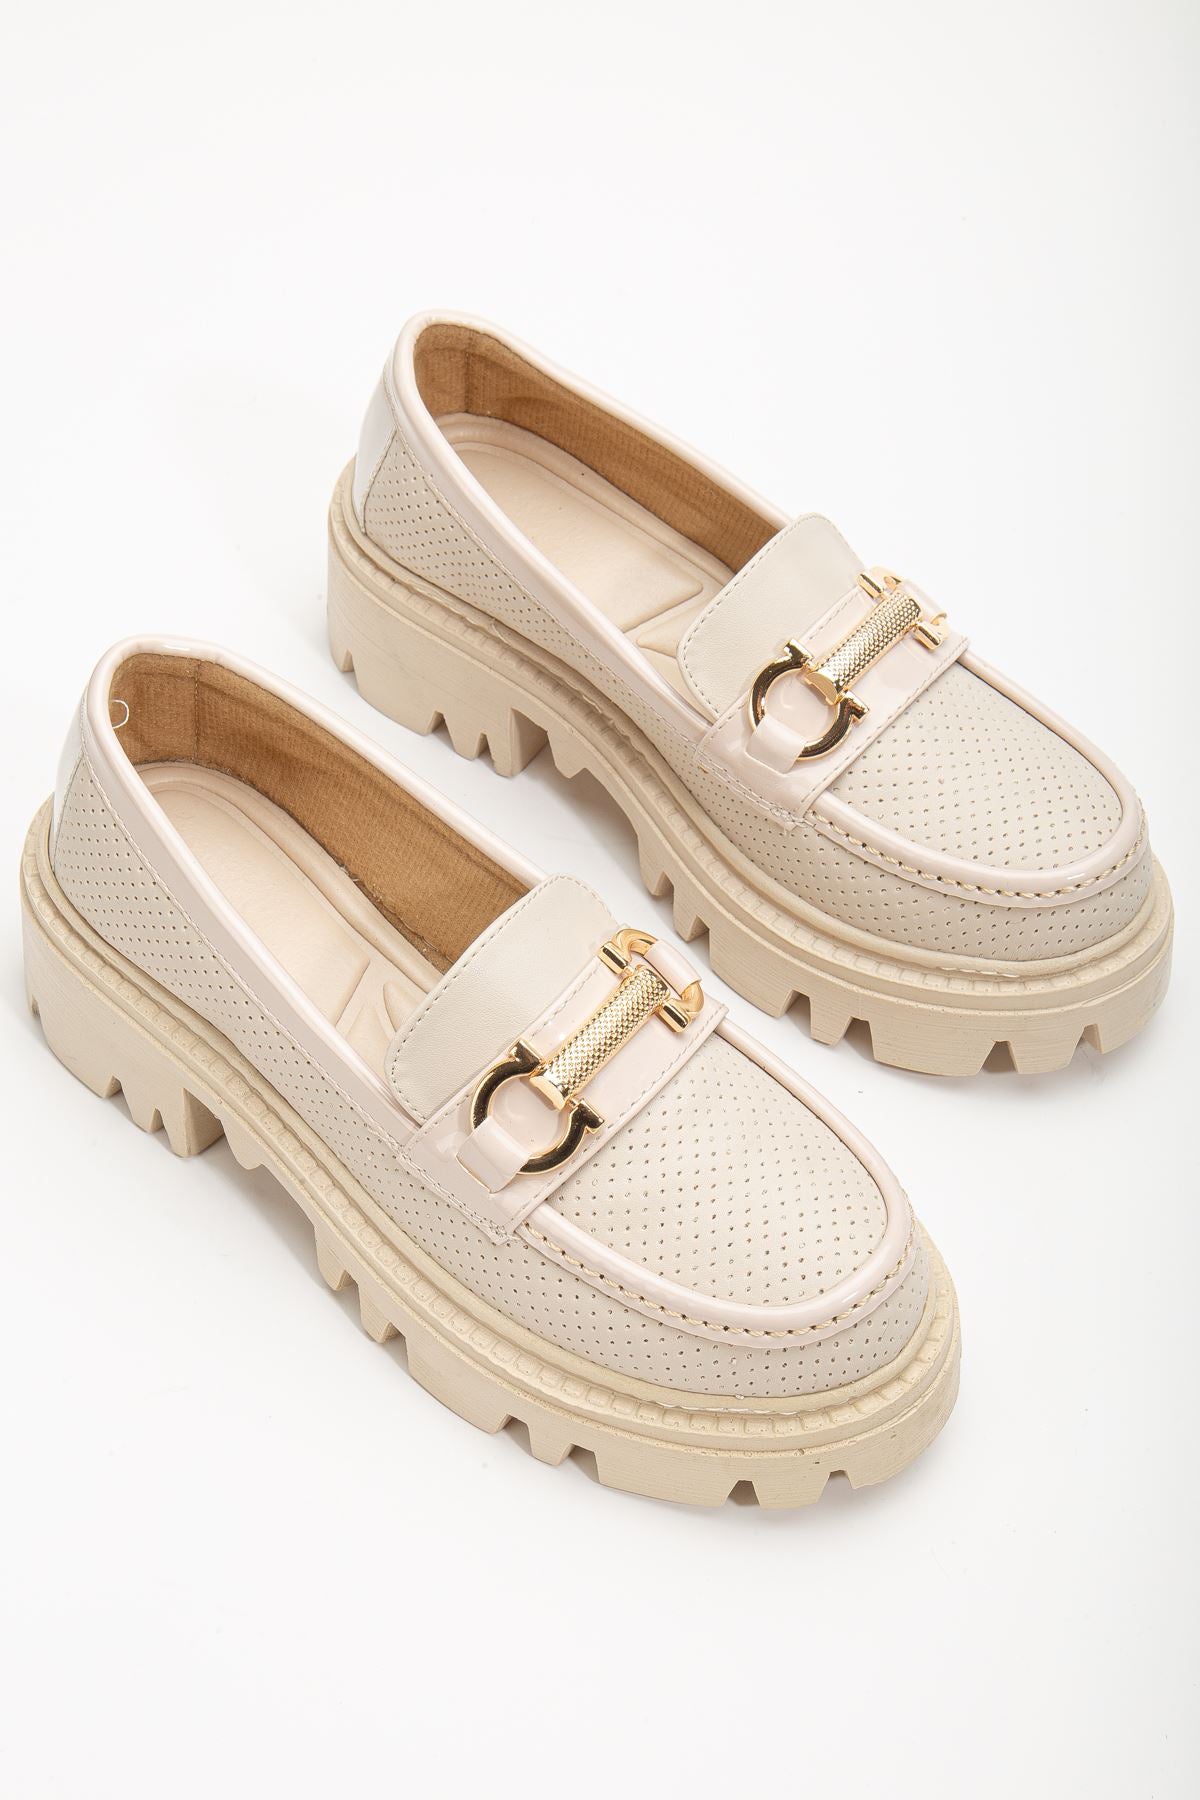 Women's Cream Buckle Detailed Oxford Shoes - STREETMODE™